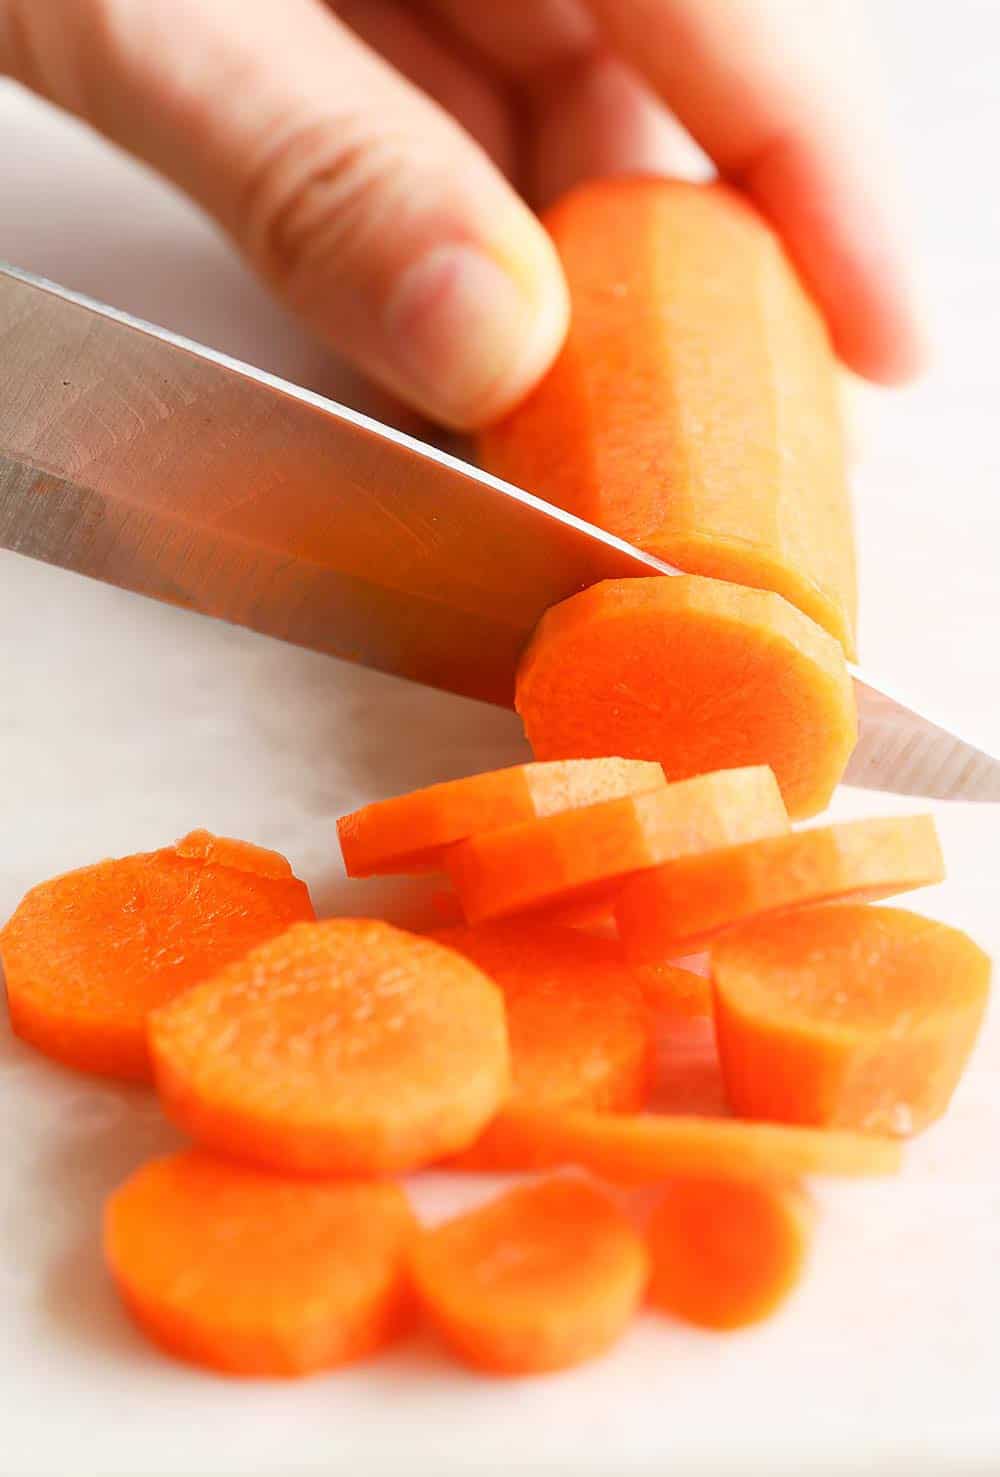 Hand cutting carrots into slices